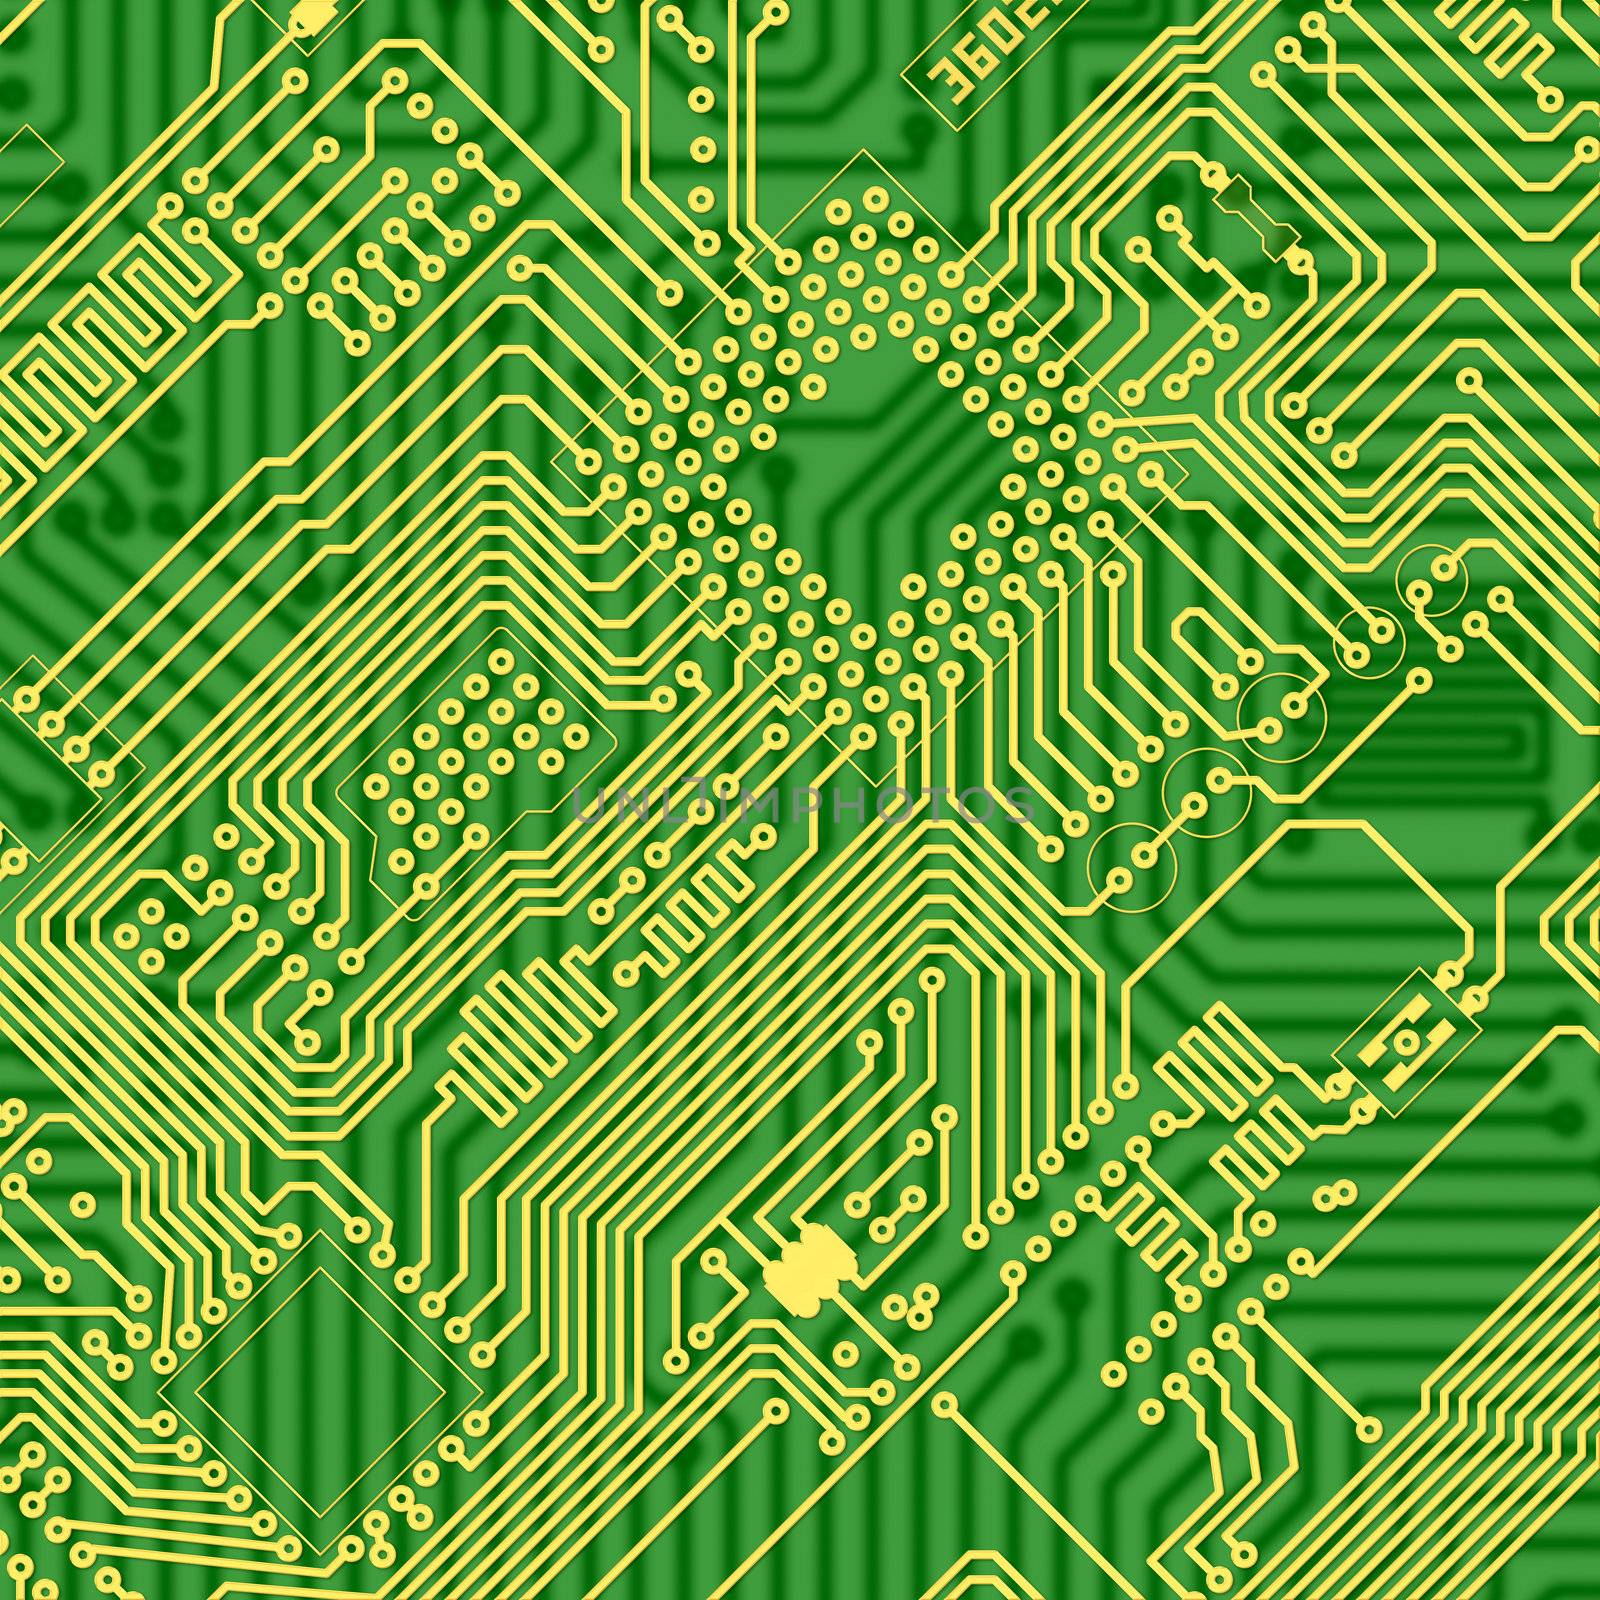 Green printed industrial circuit board texture by pzaxe